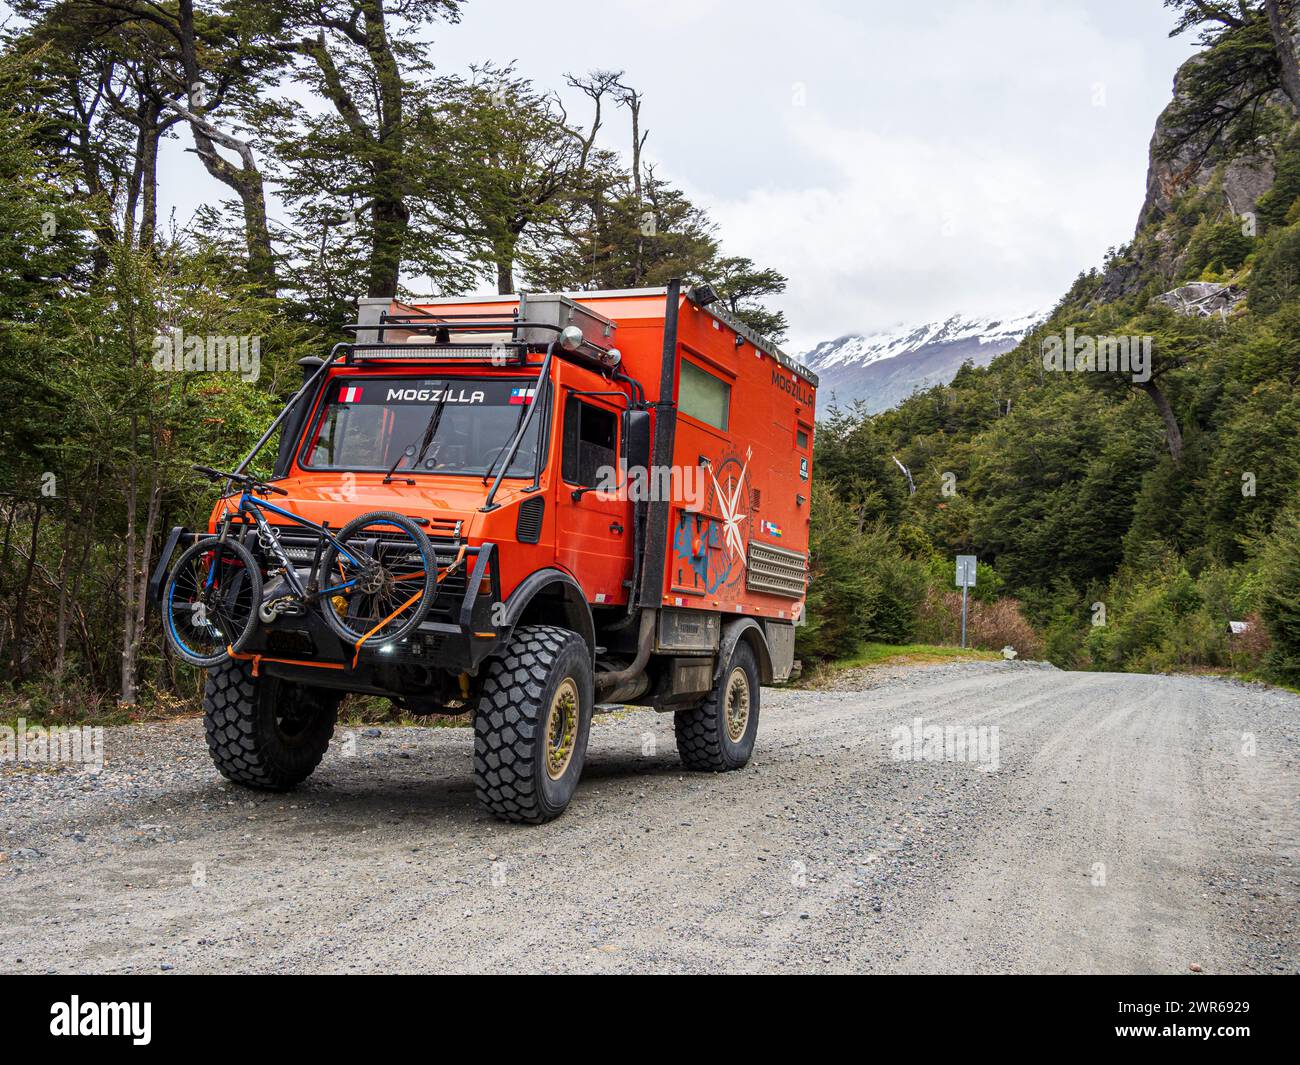 Overlander Truck on Gravel Road, Valle Exploradores, Patagonia, Cile Foto Stock